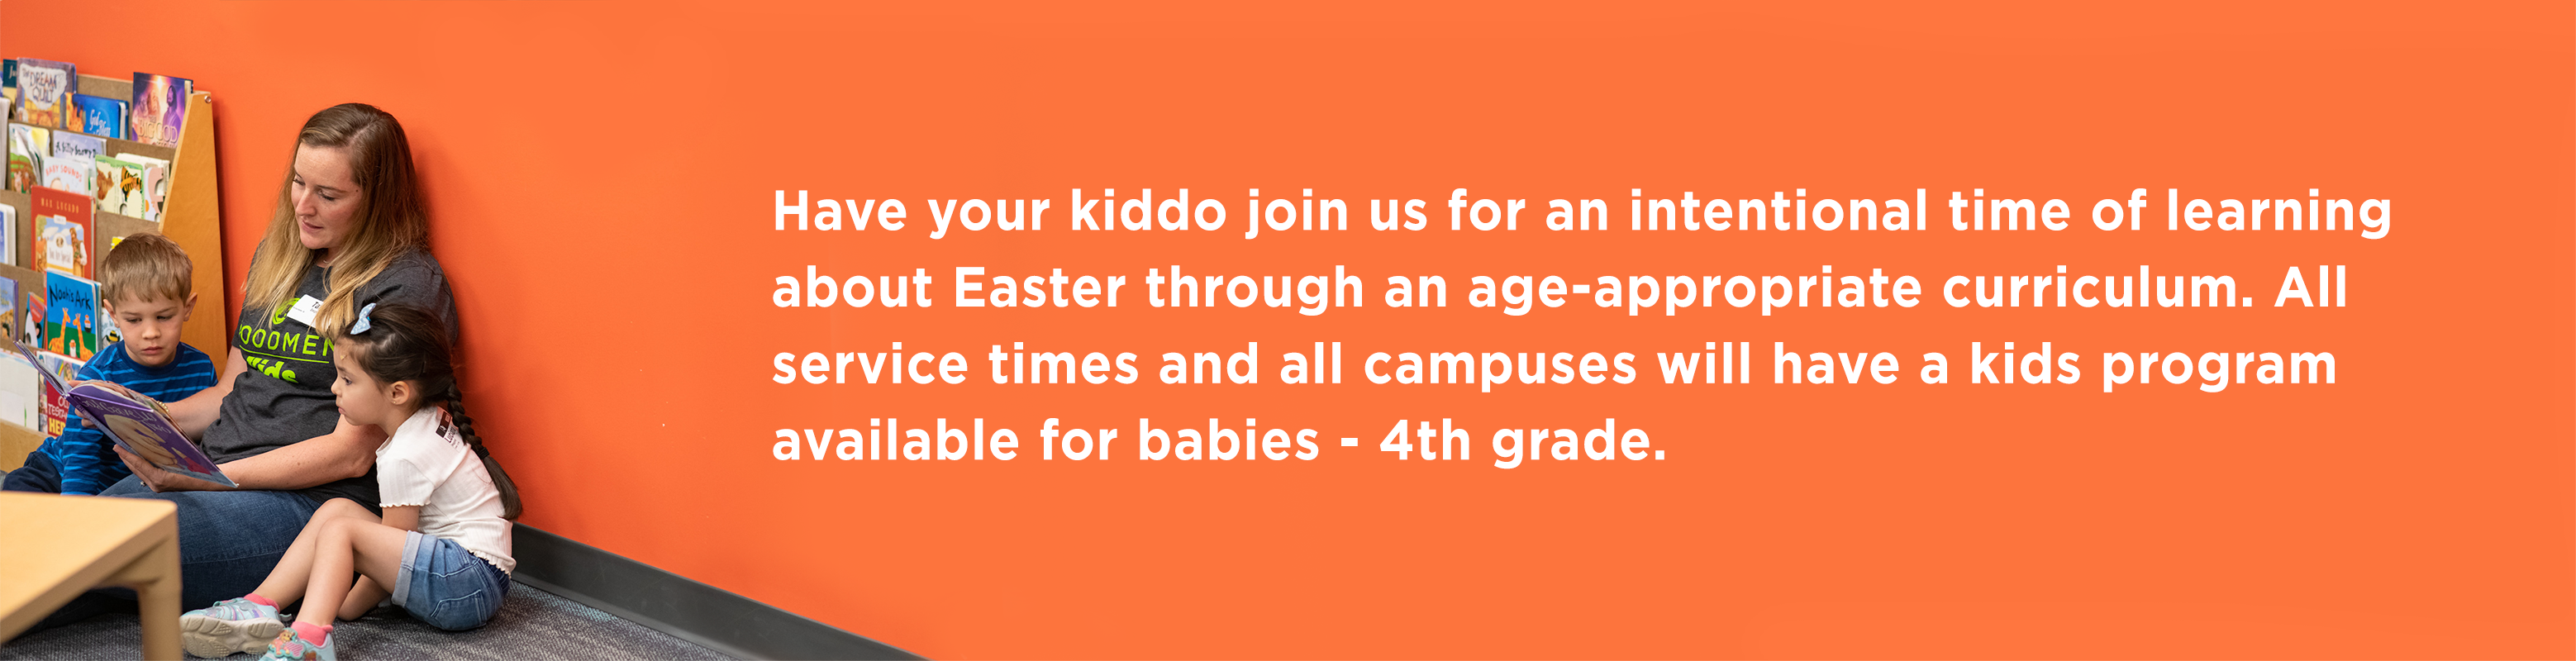 Have your kiddo join us for an intentional time of learning about Easter through an age-appropriate curriculum. All service times and all campuses will have a kids program available for babies - kindergarten.